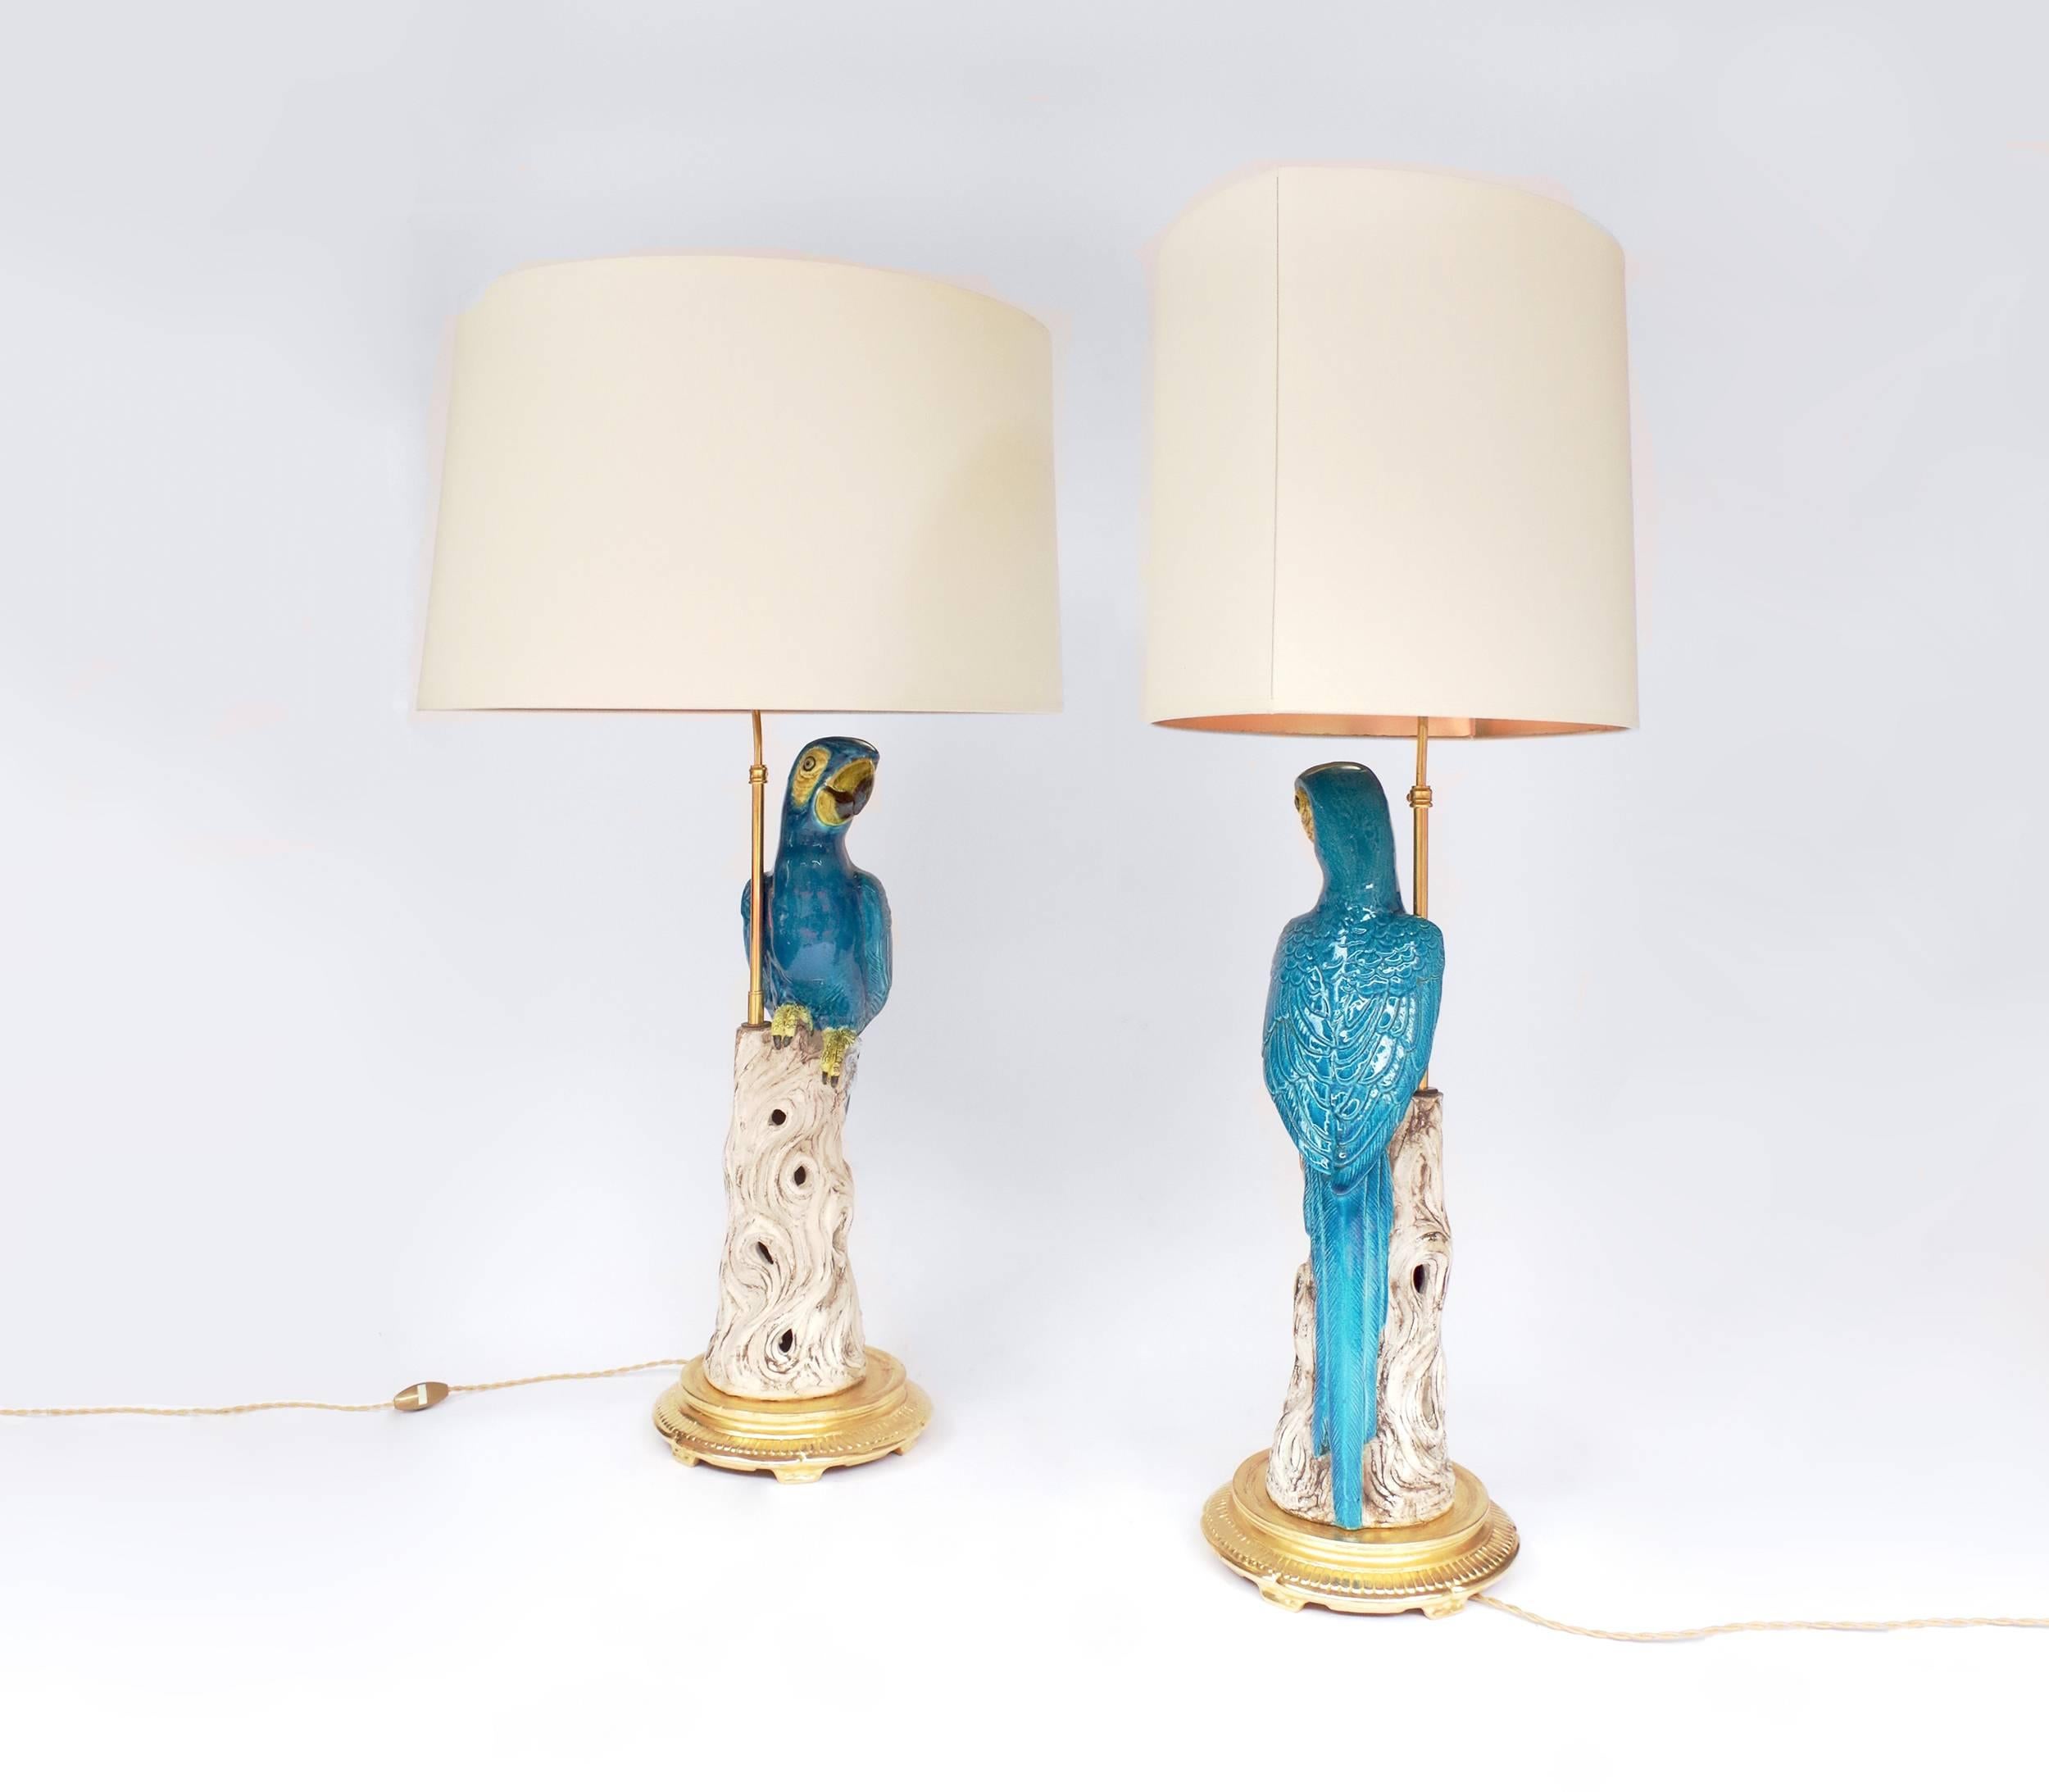 Paire of faience lamps representing blue parrots standing on a tree stump. The base is in gilt terracotta, looking like a gilt bronze mount.
Work of the 1970s, old electric system fully replaced by a functional new one (European type).

! The price